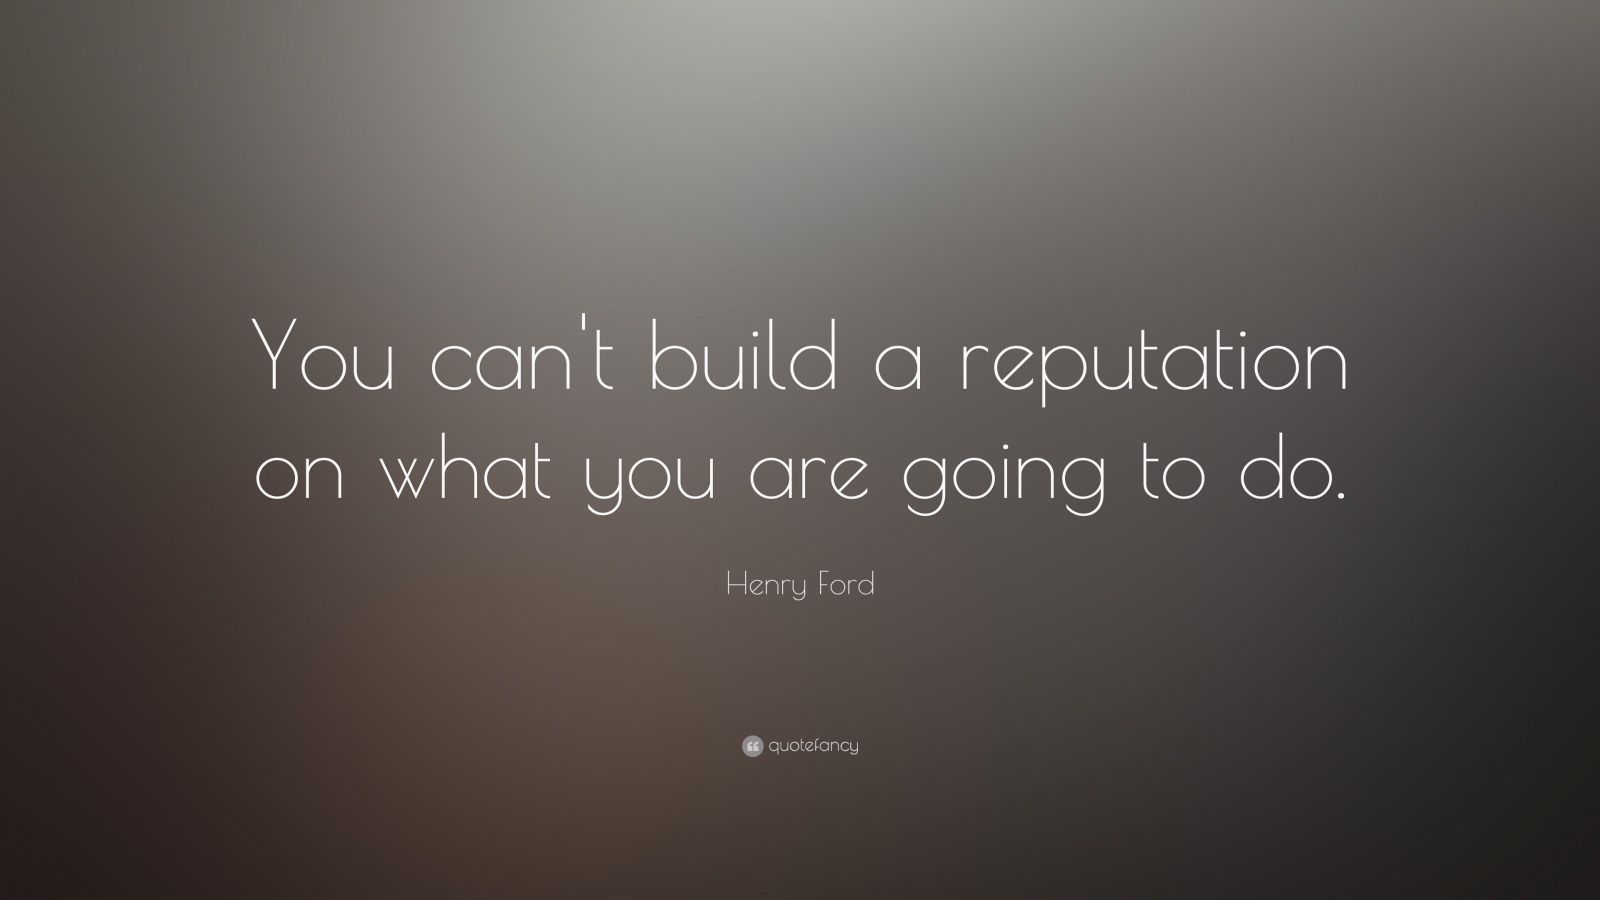 Henry ford quote i will build a car #4